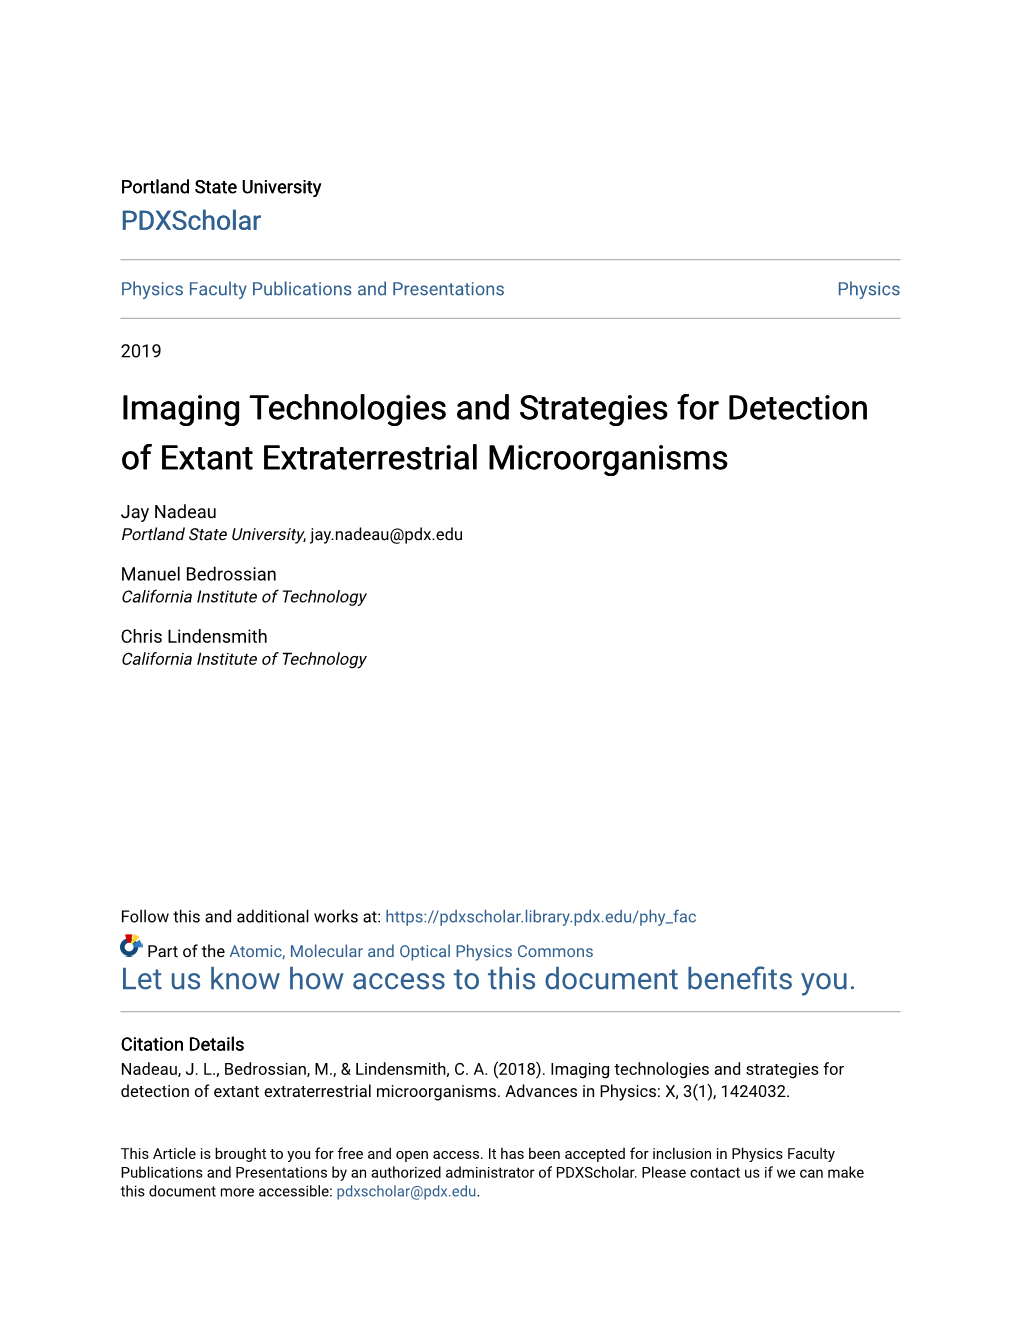 Imaging Technologies and Strategies for Detection of Extant Extraterrestrial Microorganisms